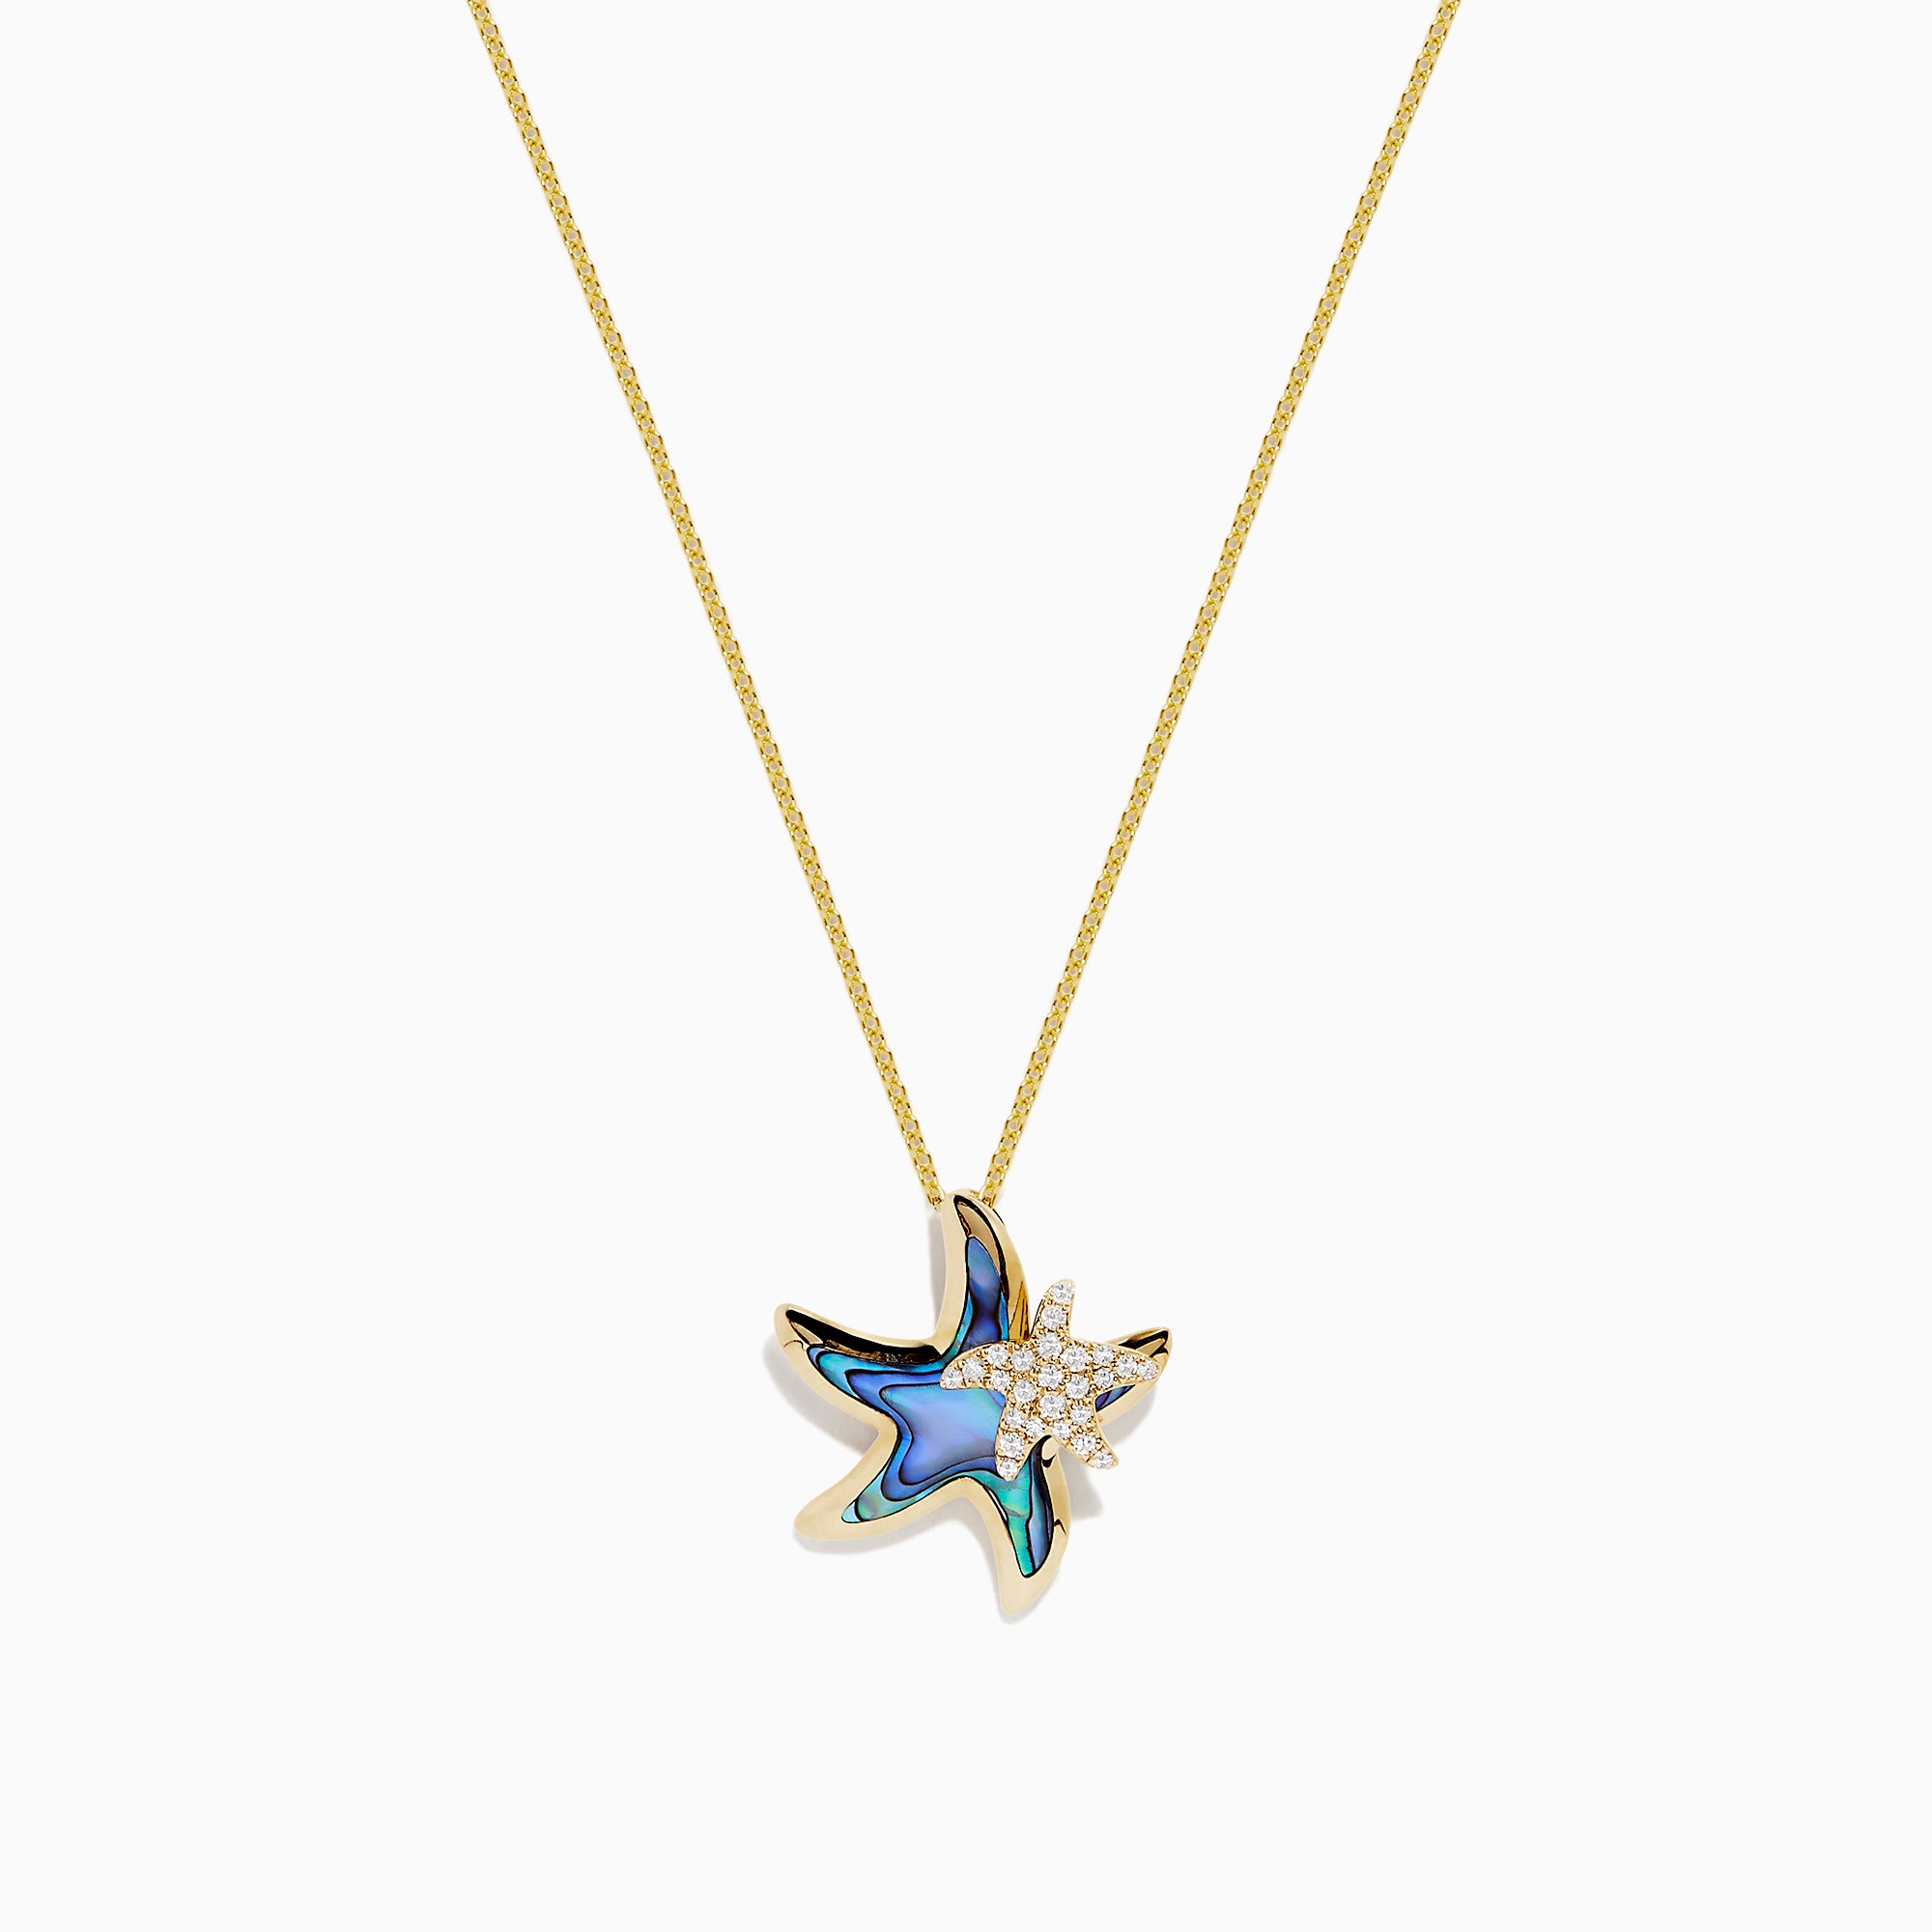 Jewellery - Necklaces & Pendants - Pendant Necklaces - EFFY Jewellery 14K  Rose Gold White and Champagne Diamond Starfish Pendant with Chain - Online  Shopping for Canadians